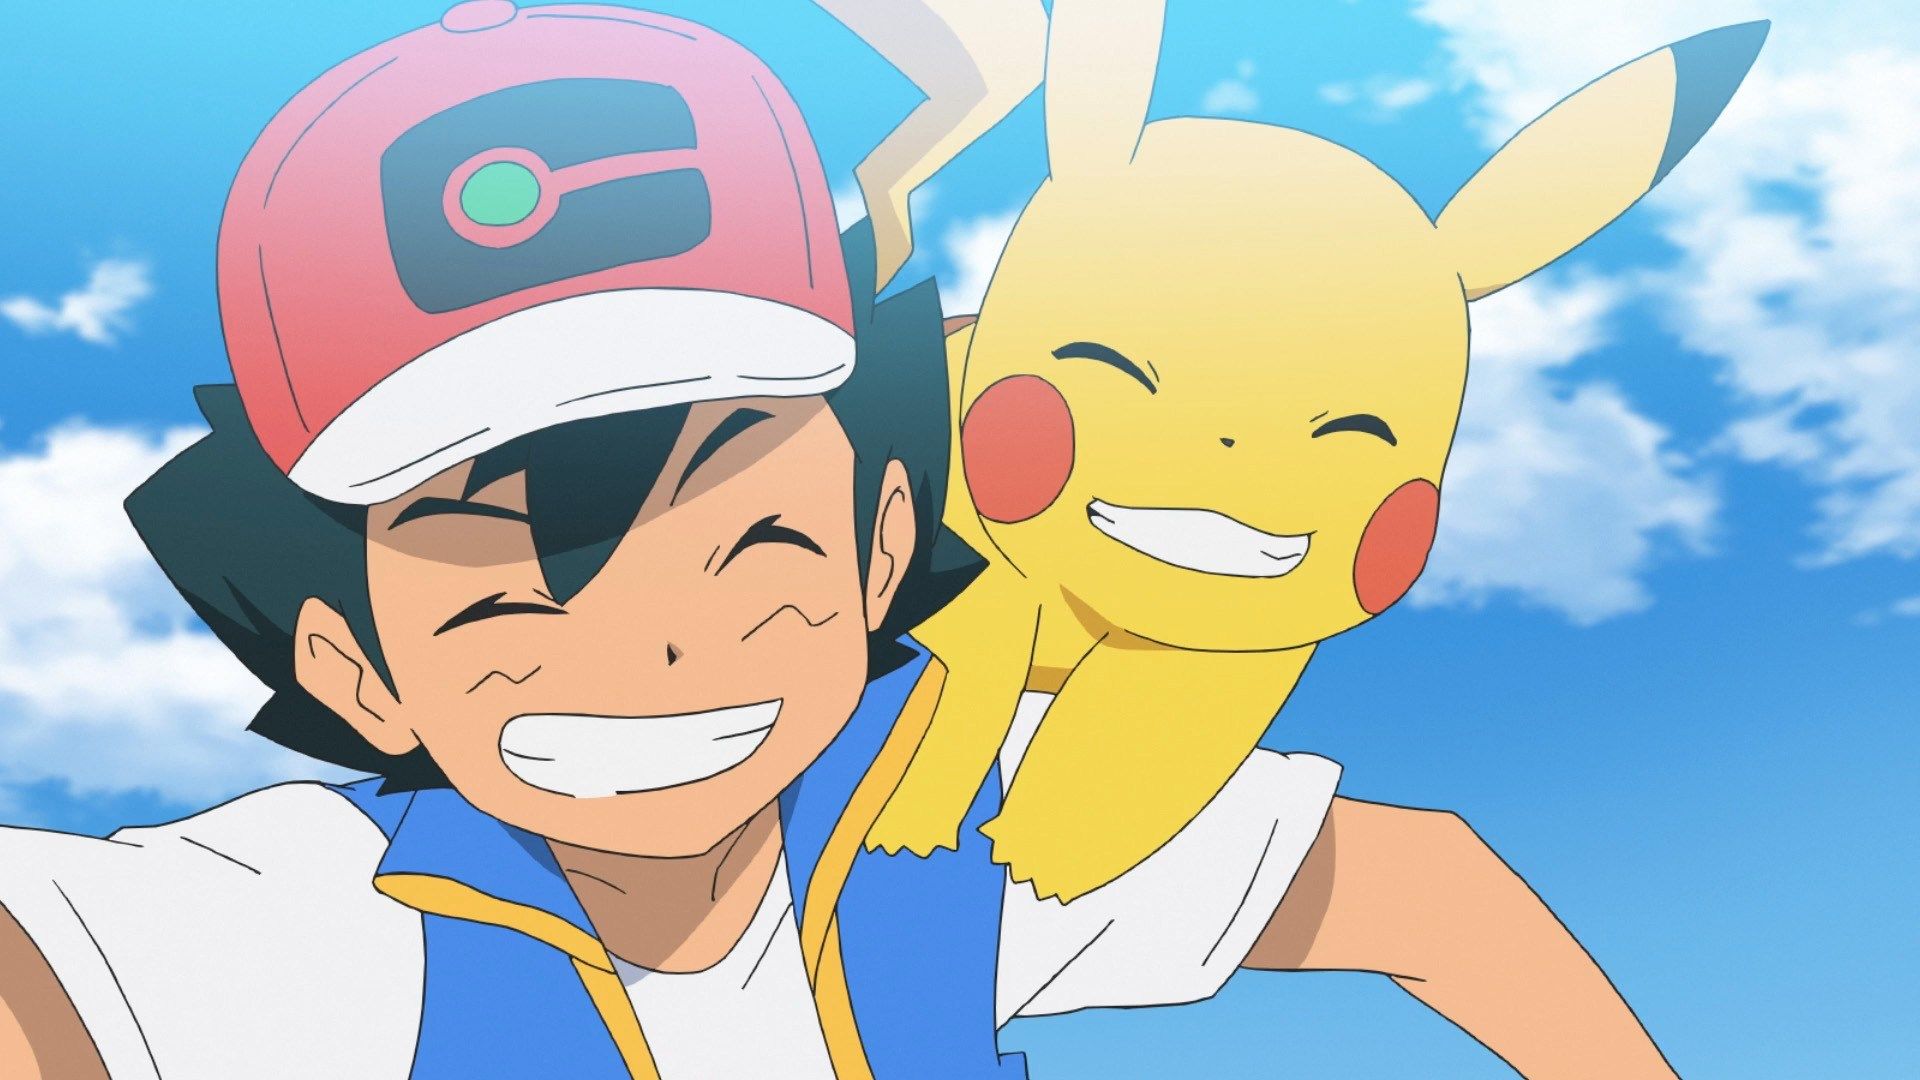 It's Netflix's Time to Catch Them All as Pokémon Journeys: The Series is Coming Soon